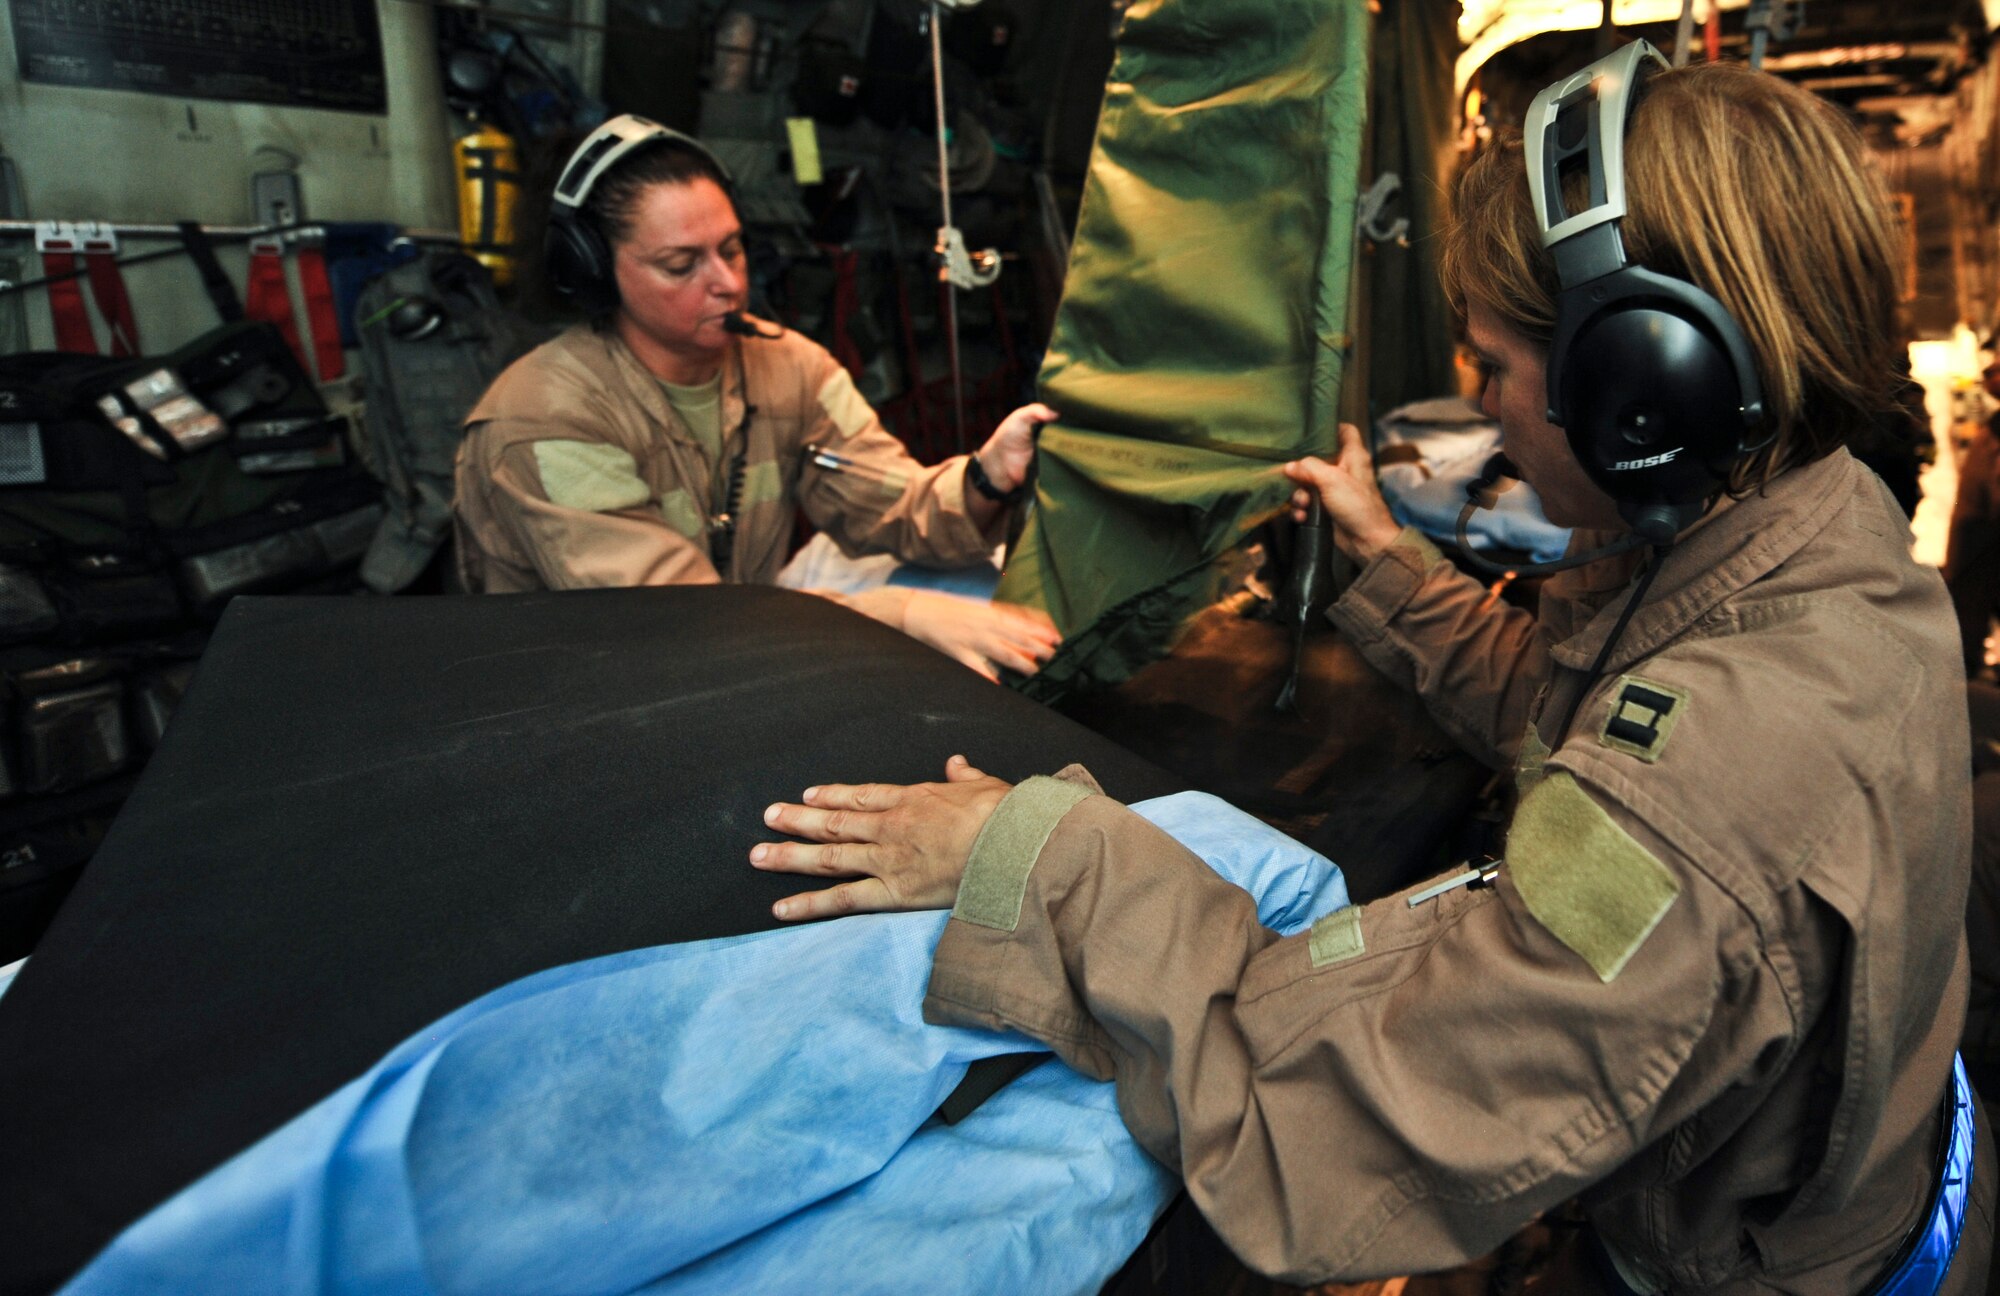 Capt. Christy Livery, 379th Expeditionary Aeromedical Evacuation Squadron medical crew director, and Master Sgt. Jennifer Wilson, 379th EAES aeromedical evacuation technician, prepare a litter for a patient on a C-130 Hercules prior to an aeromedical evacuation mission, Aug. 6.  Livery is deployed from Scott Air Force Base, Ill., and Wilson is deployed from Peterson Air Force Base, Colo. (U.S. Air Force photo/Senior Airman Paul Labbe)